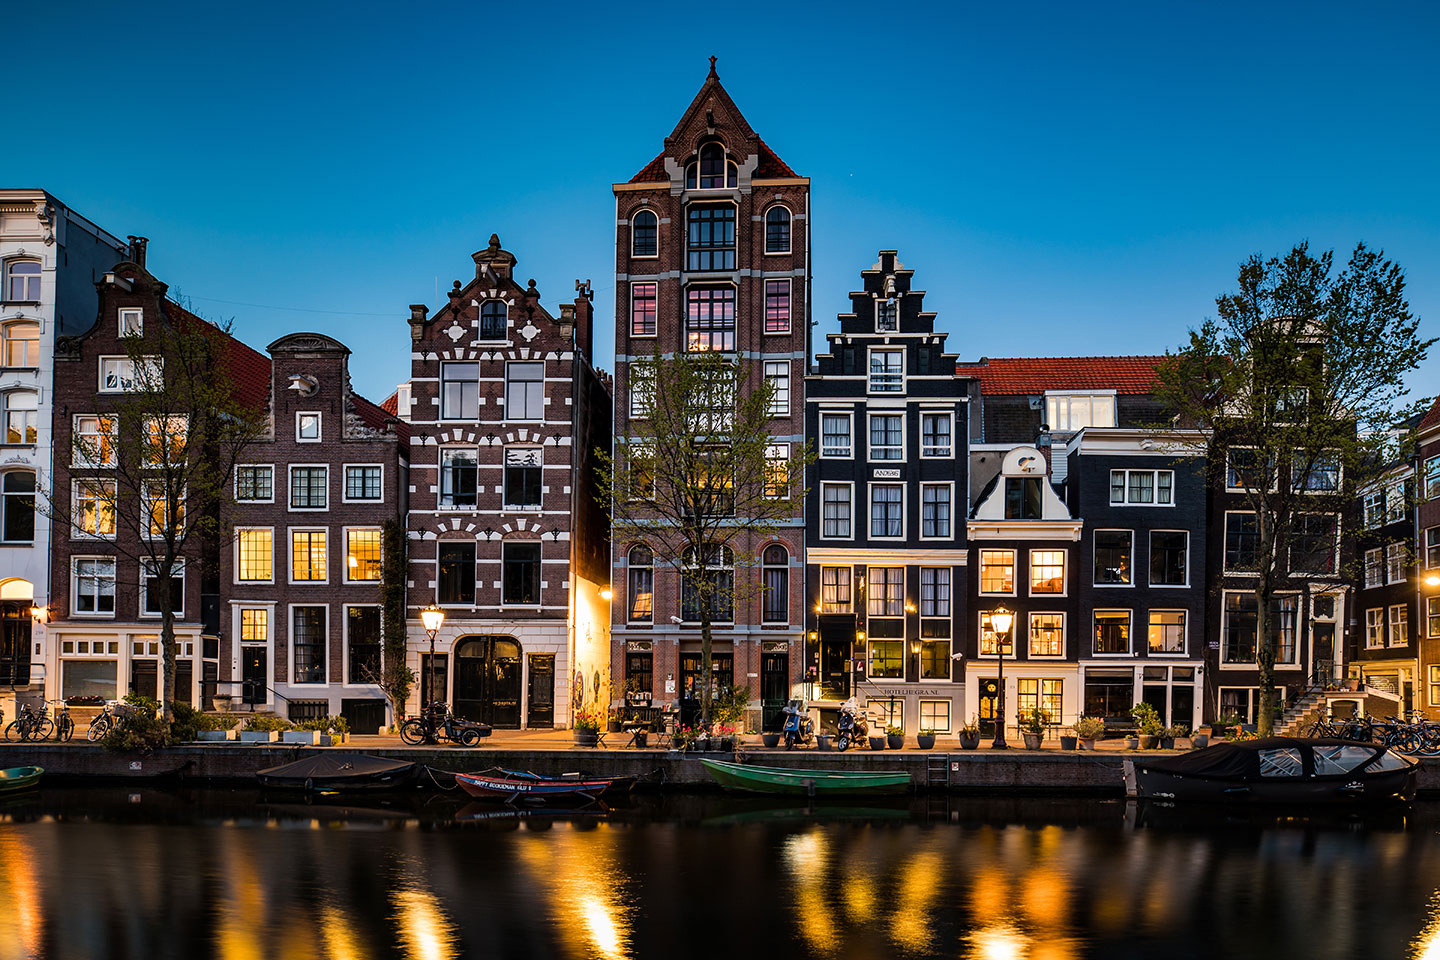 Beautiful Dutch architecture in the streets of Amsterdam, the Netherlands